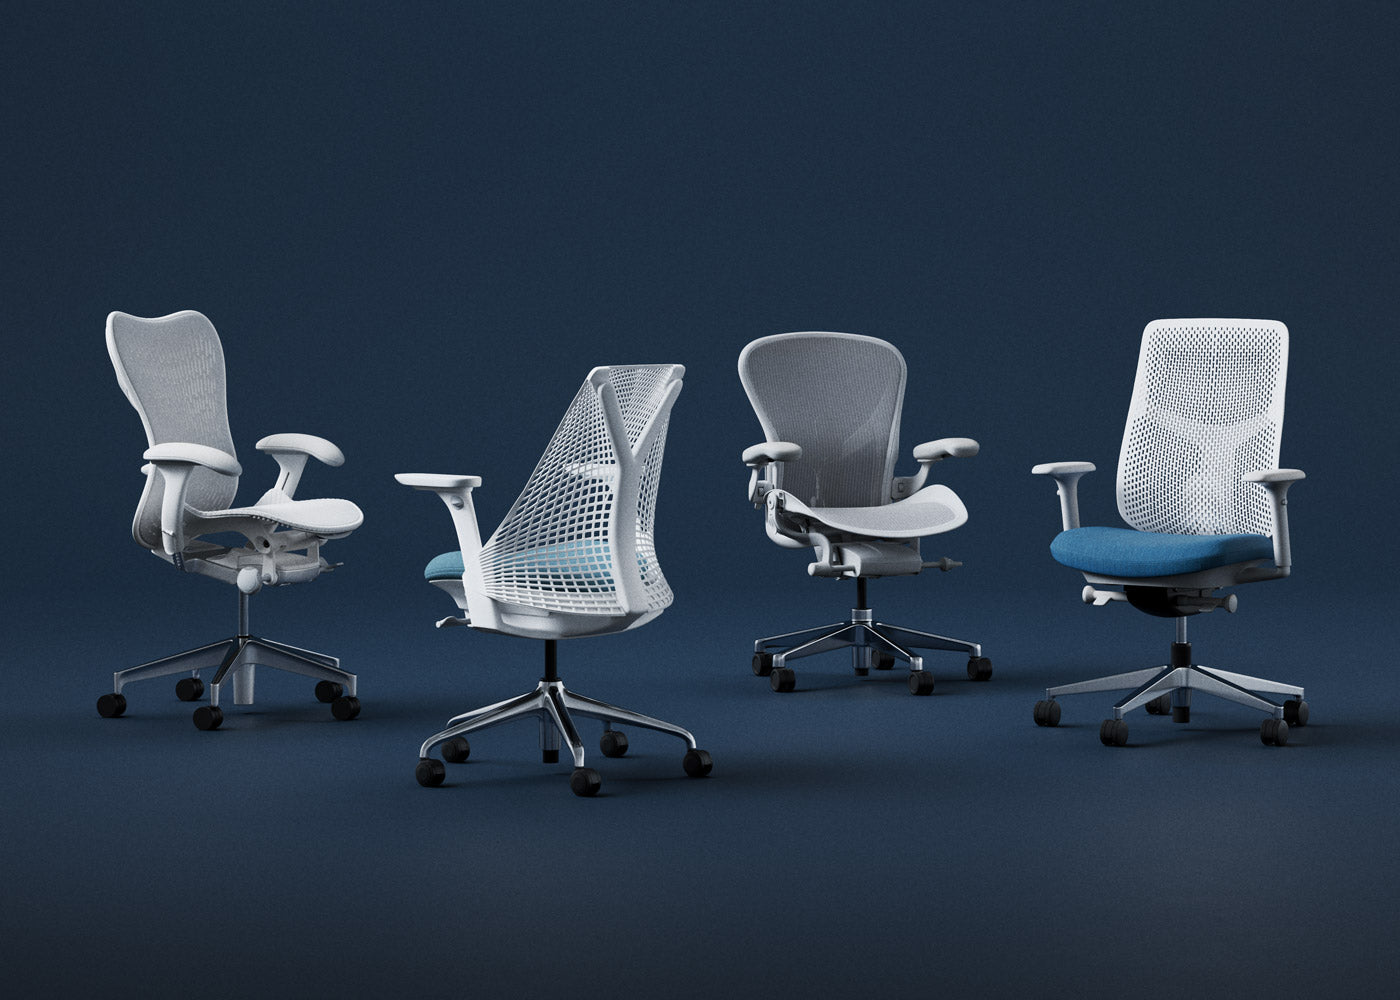 A lineup of four white Herman Miller ergonomic office chairs against a navy blue back drop.